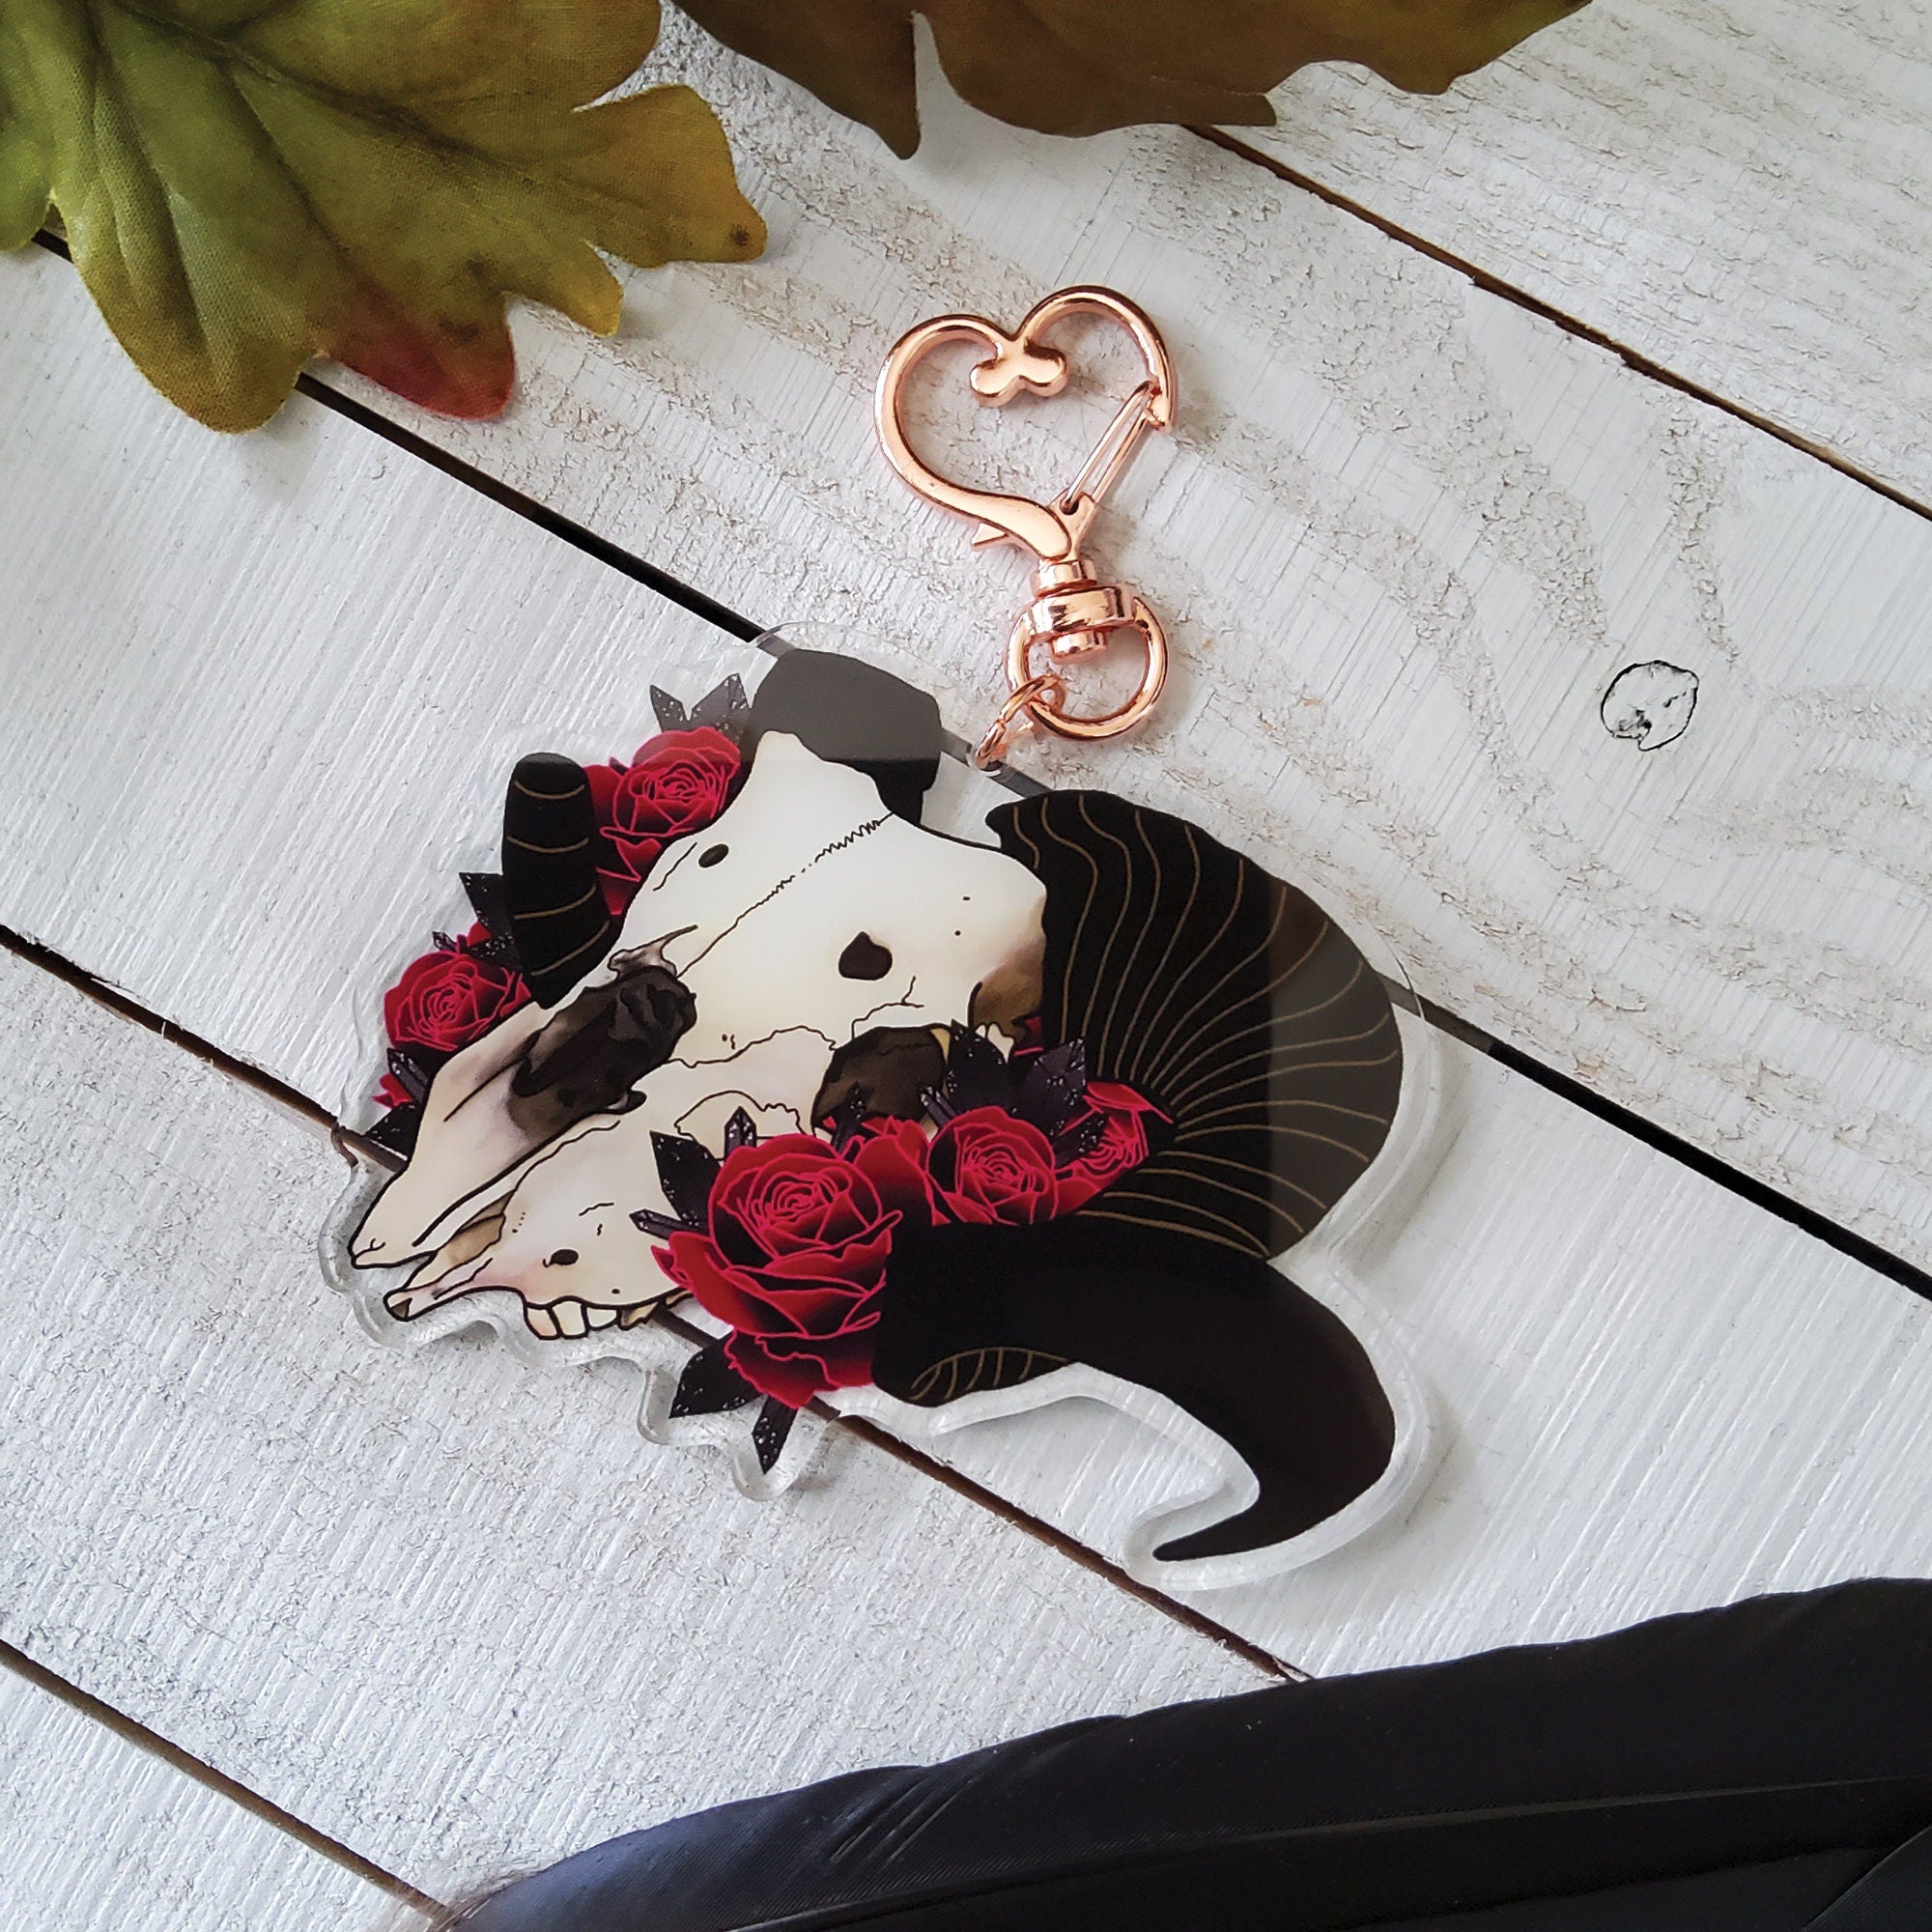 ACRYLIC CHARM Double Sided: Ram Skull and Roses , Ram Skull Charm , Skull Charm , Skull and Roses Charm , Ram Skull Charm , Goth Charm